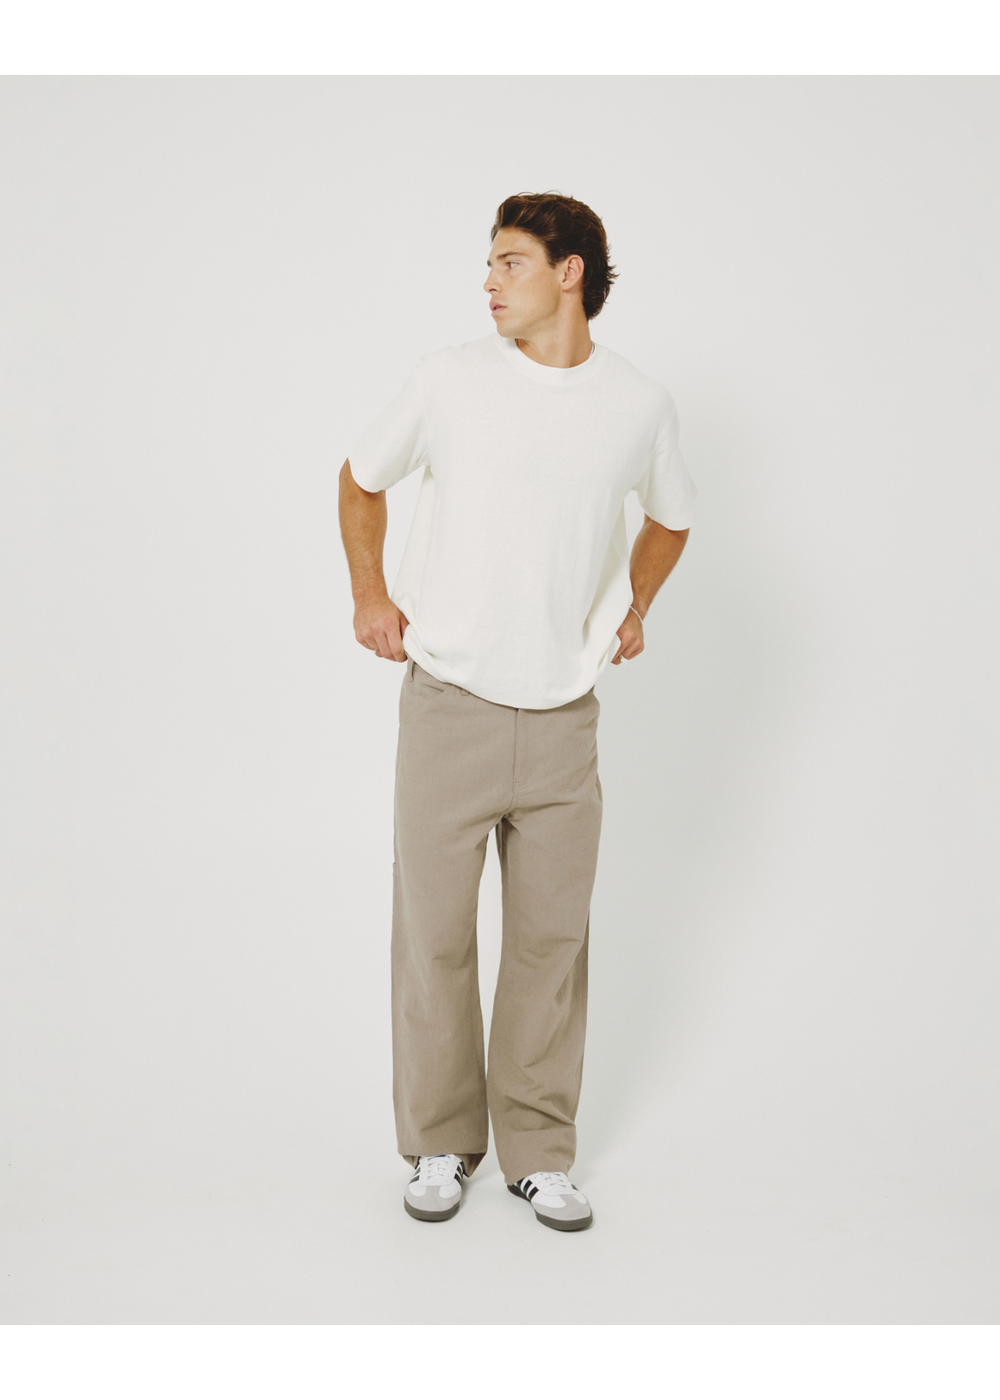 Commoners Linen/Cotton Work Pant - Smoke | COMMONERS | Mad About The Boy